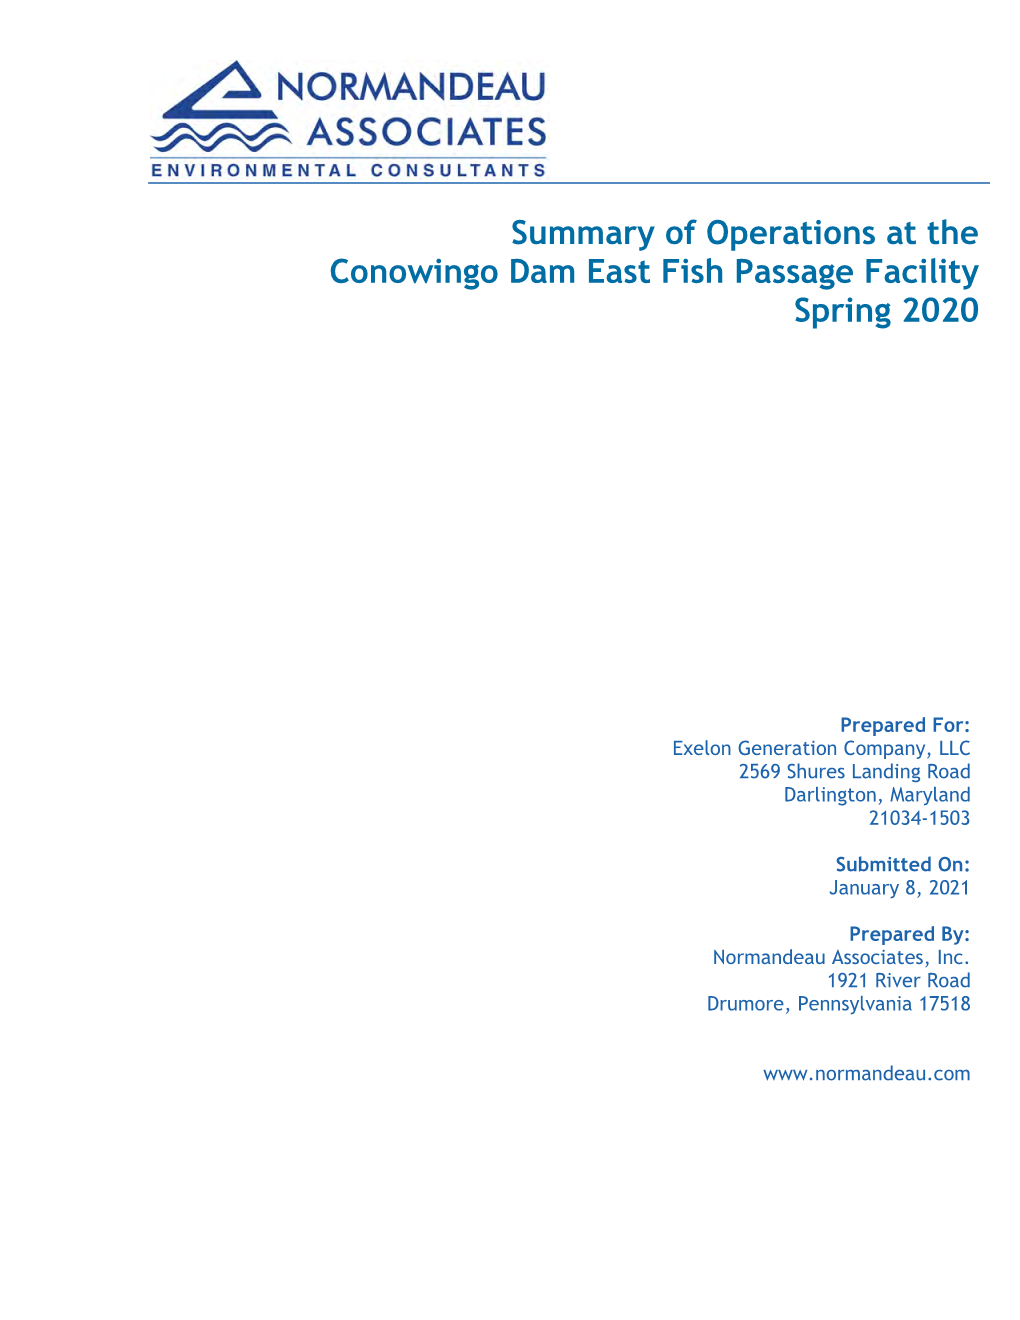 Summary of Operations at the Conowingo Dam East Fish Passage Facility Spring 2020